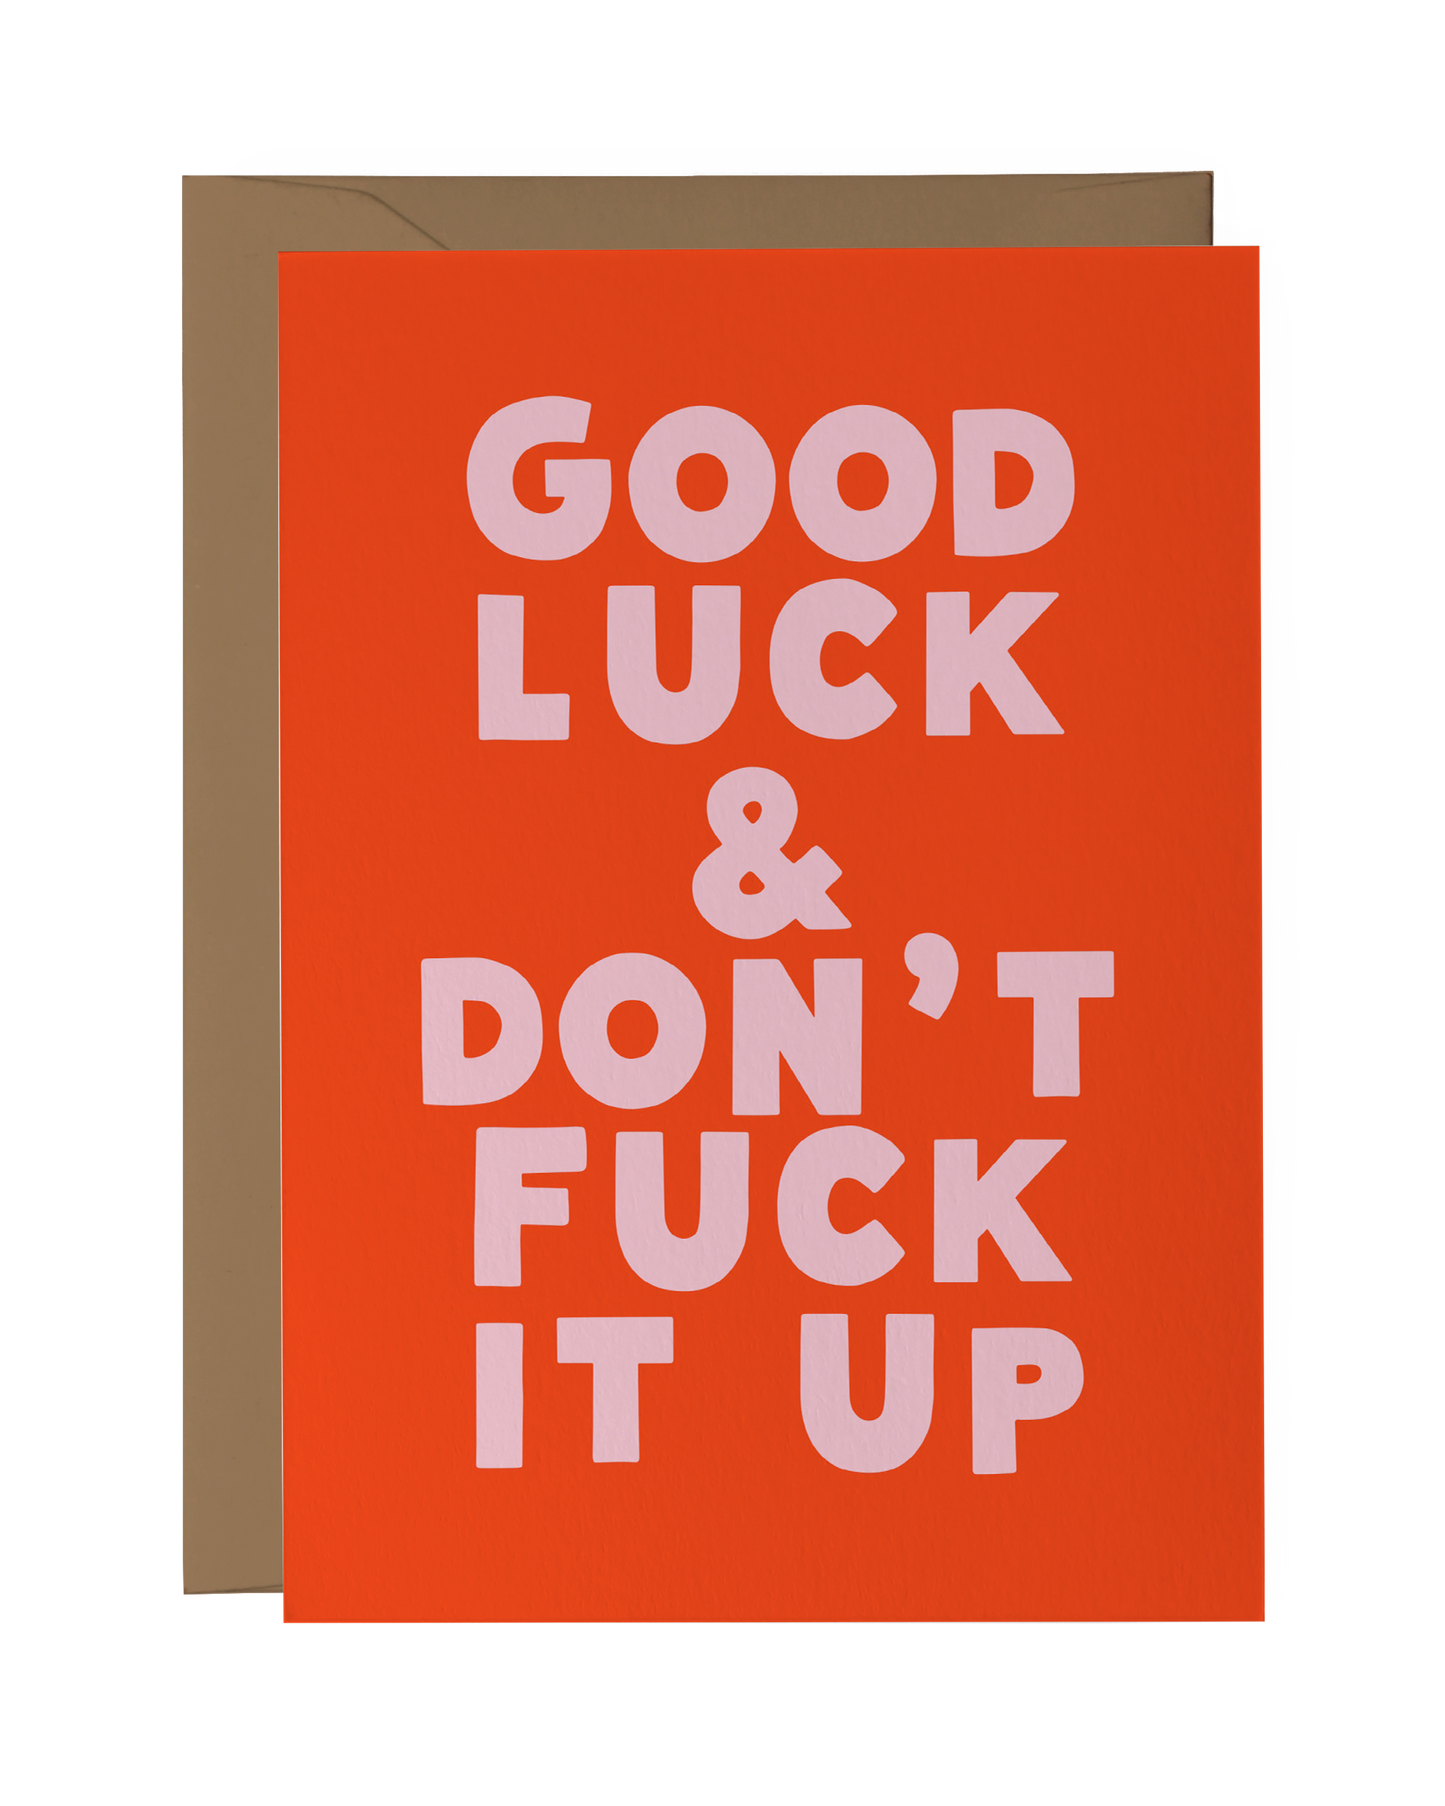 Good Luck & Don't Fuck It Up